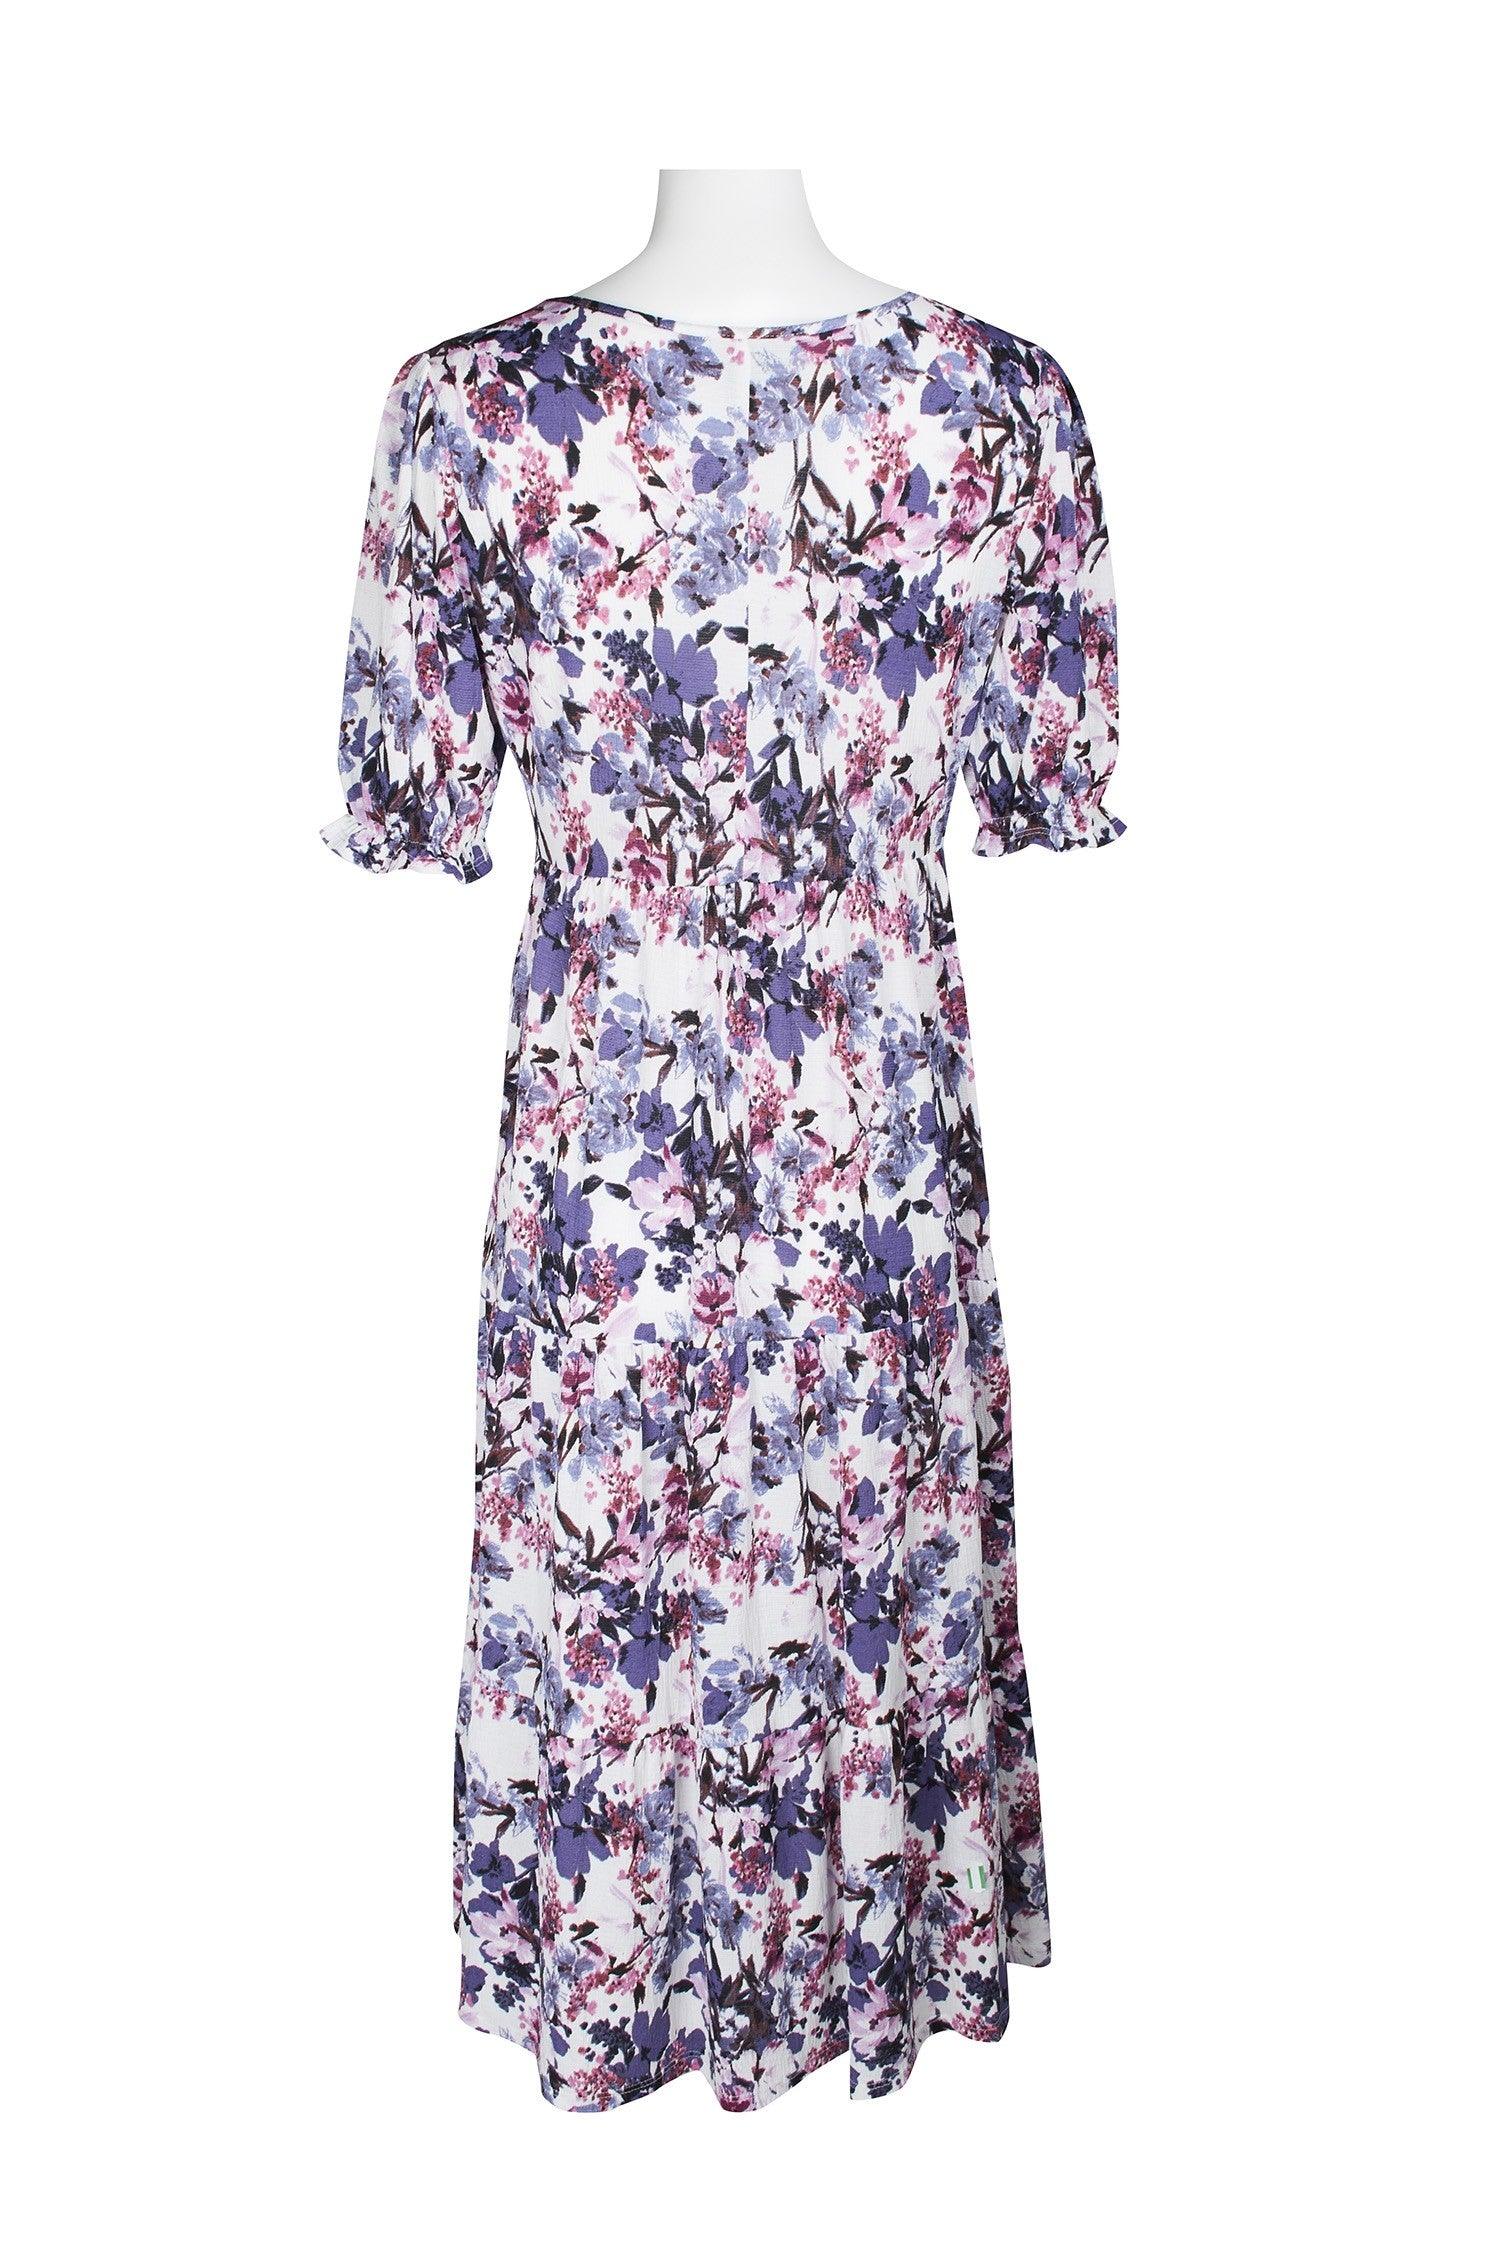 Connected Apparel Short Sleeve Floral Print Dress - The Dress Outlet